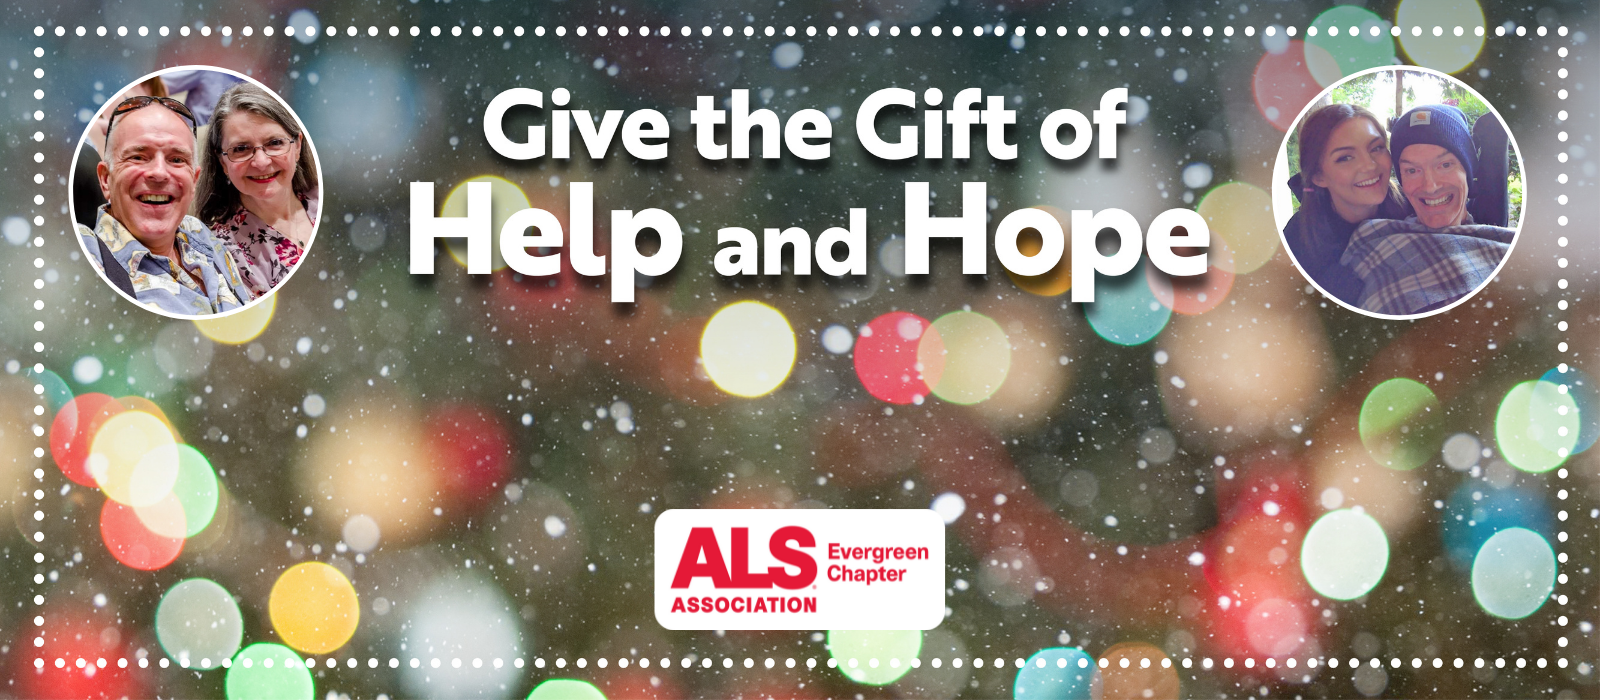 Give the gift of help and hope